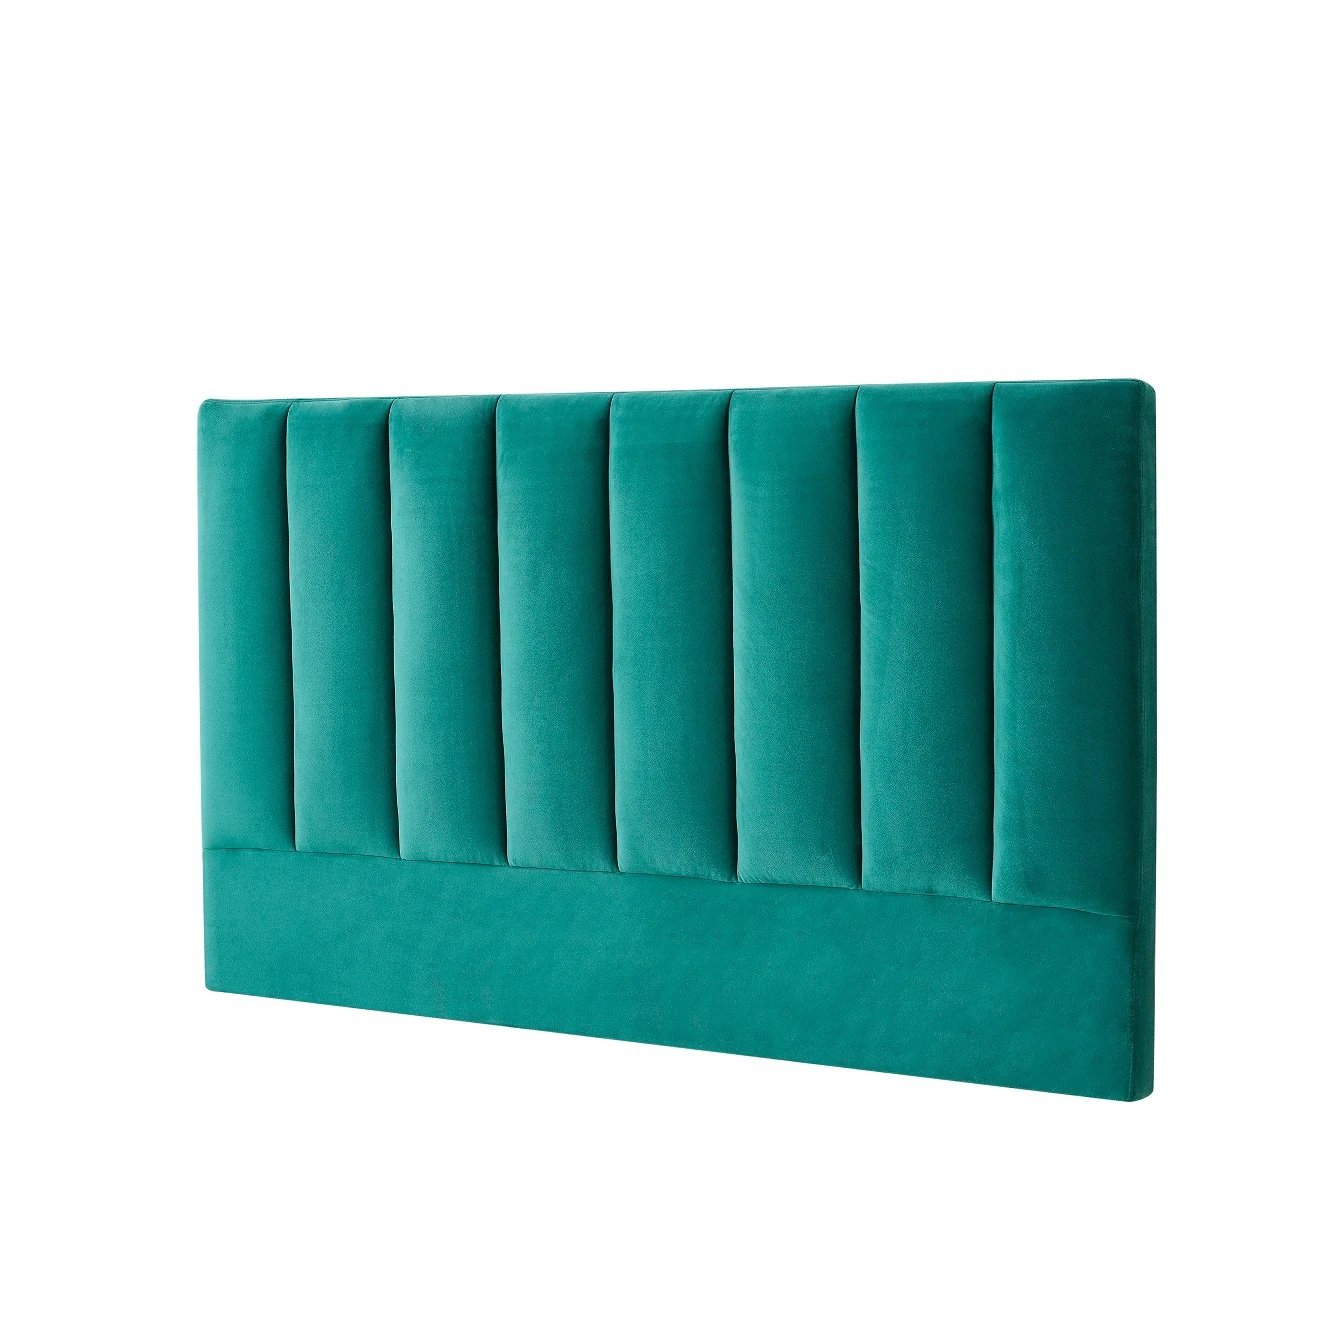 OEM Accepted Fabric Upholstered Wall Mount Headboard Lager Bed Frame Headboard